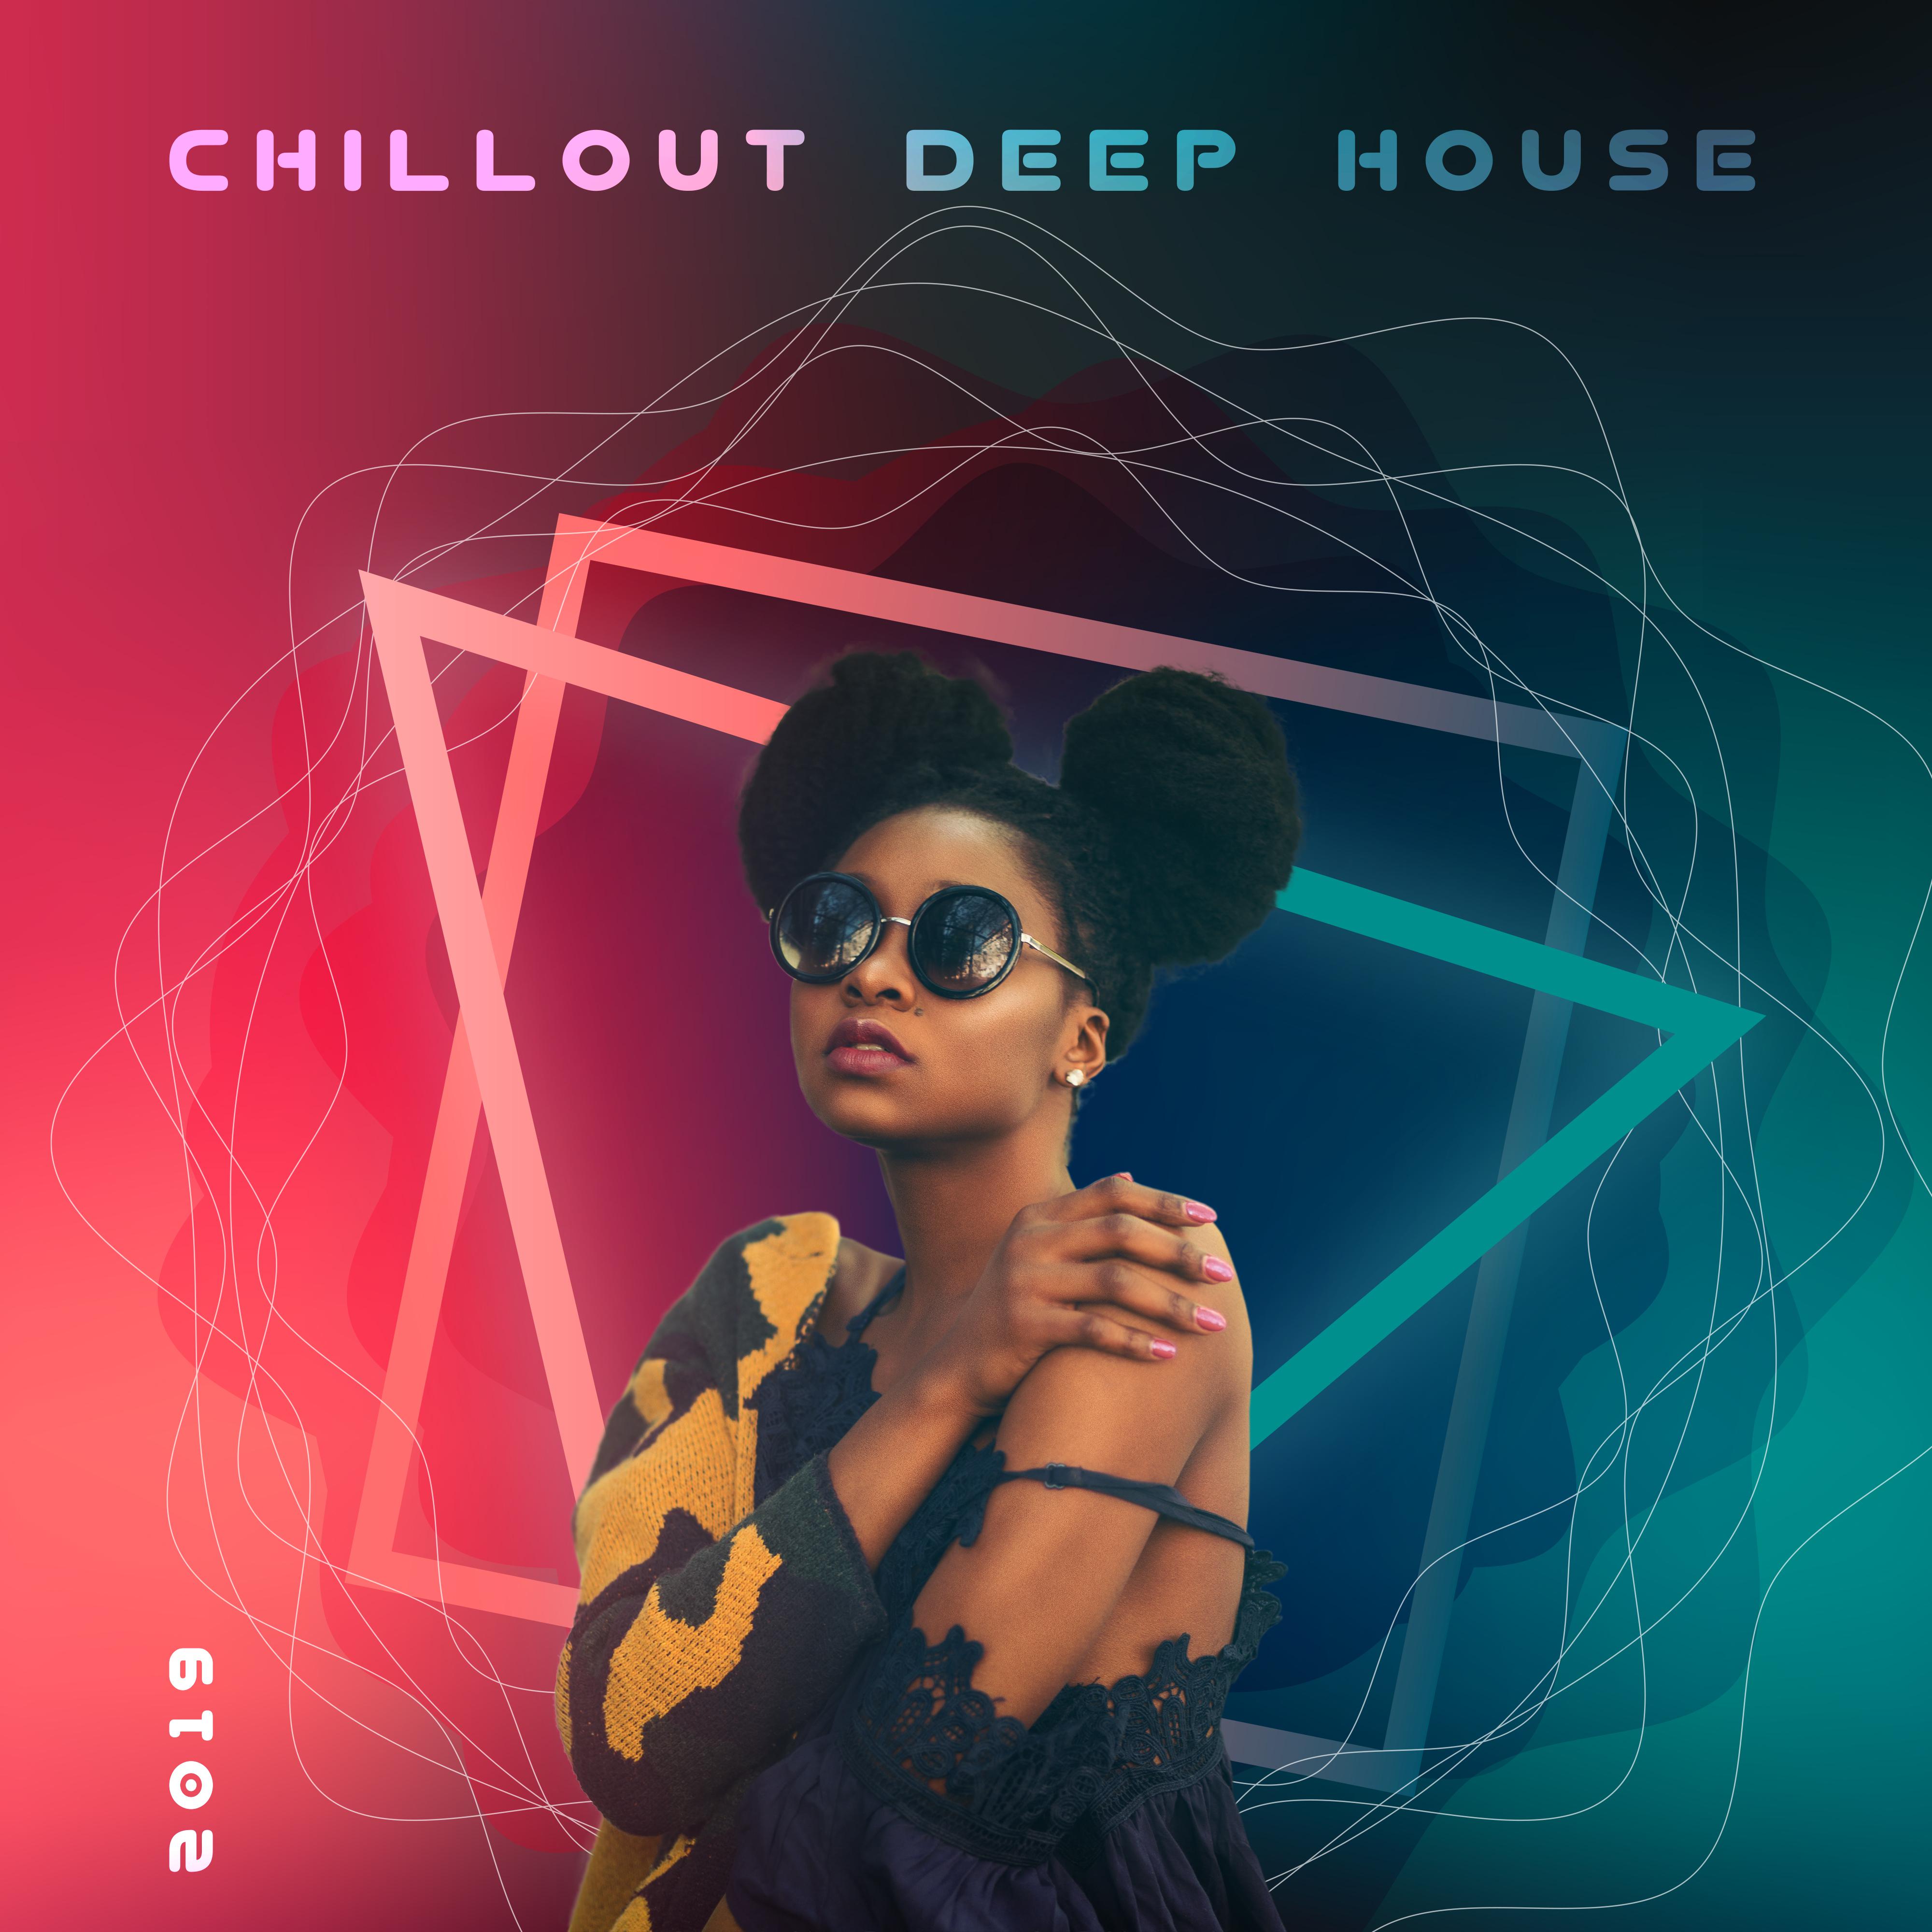 #2019 Chillout Deep House